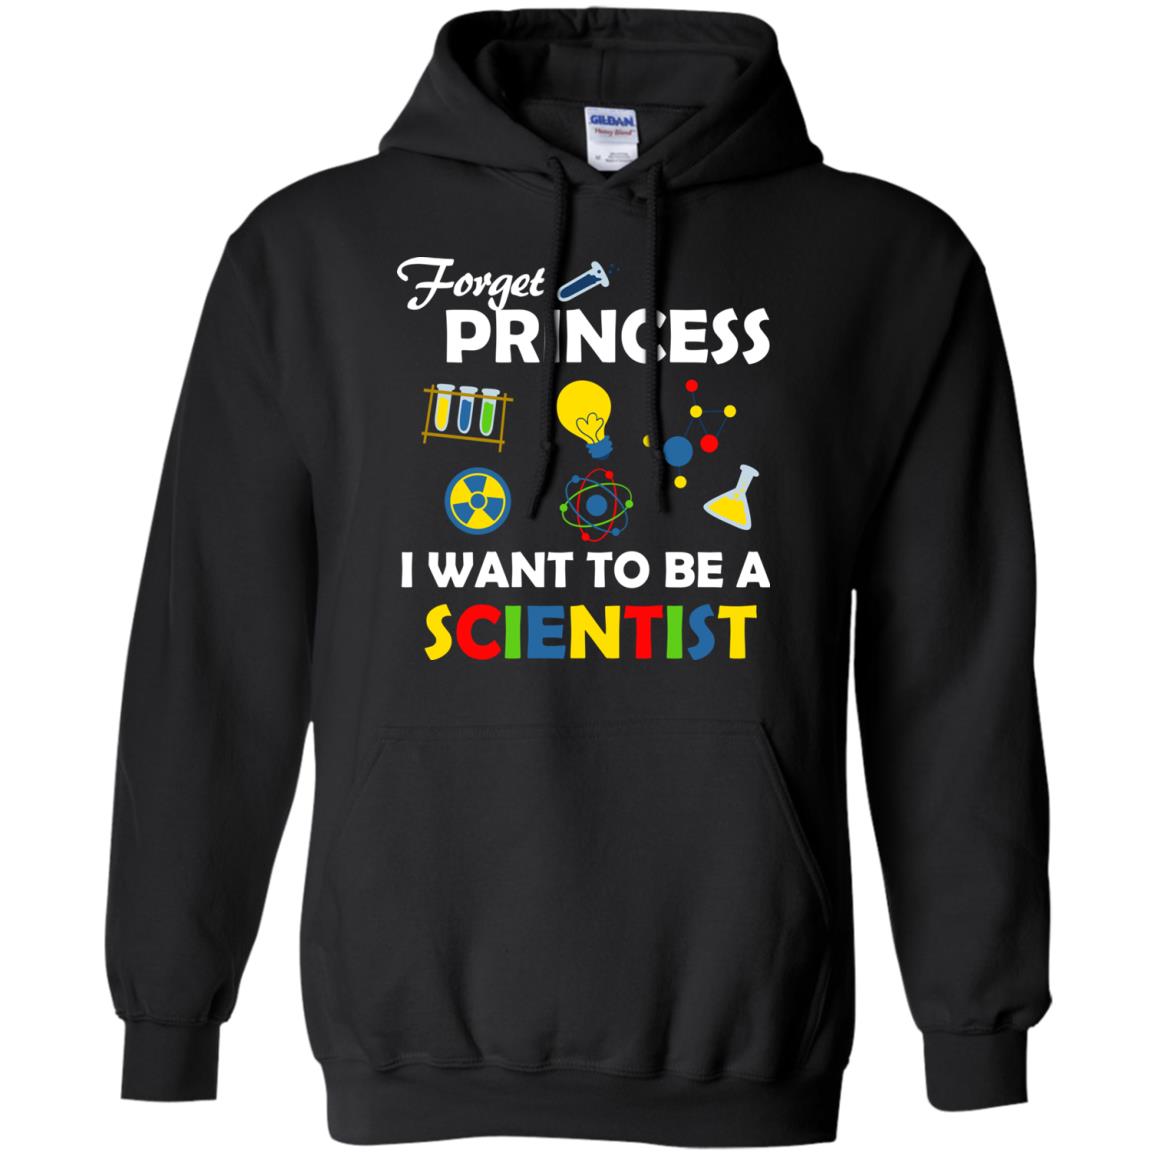 Forget Princess I Want To Be A ScientistG185 Gildan Pullover Hoodie 8 oz.